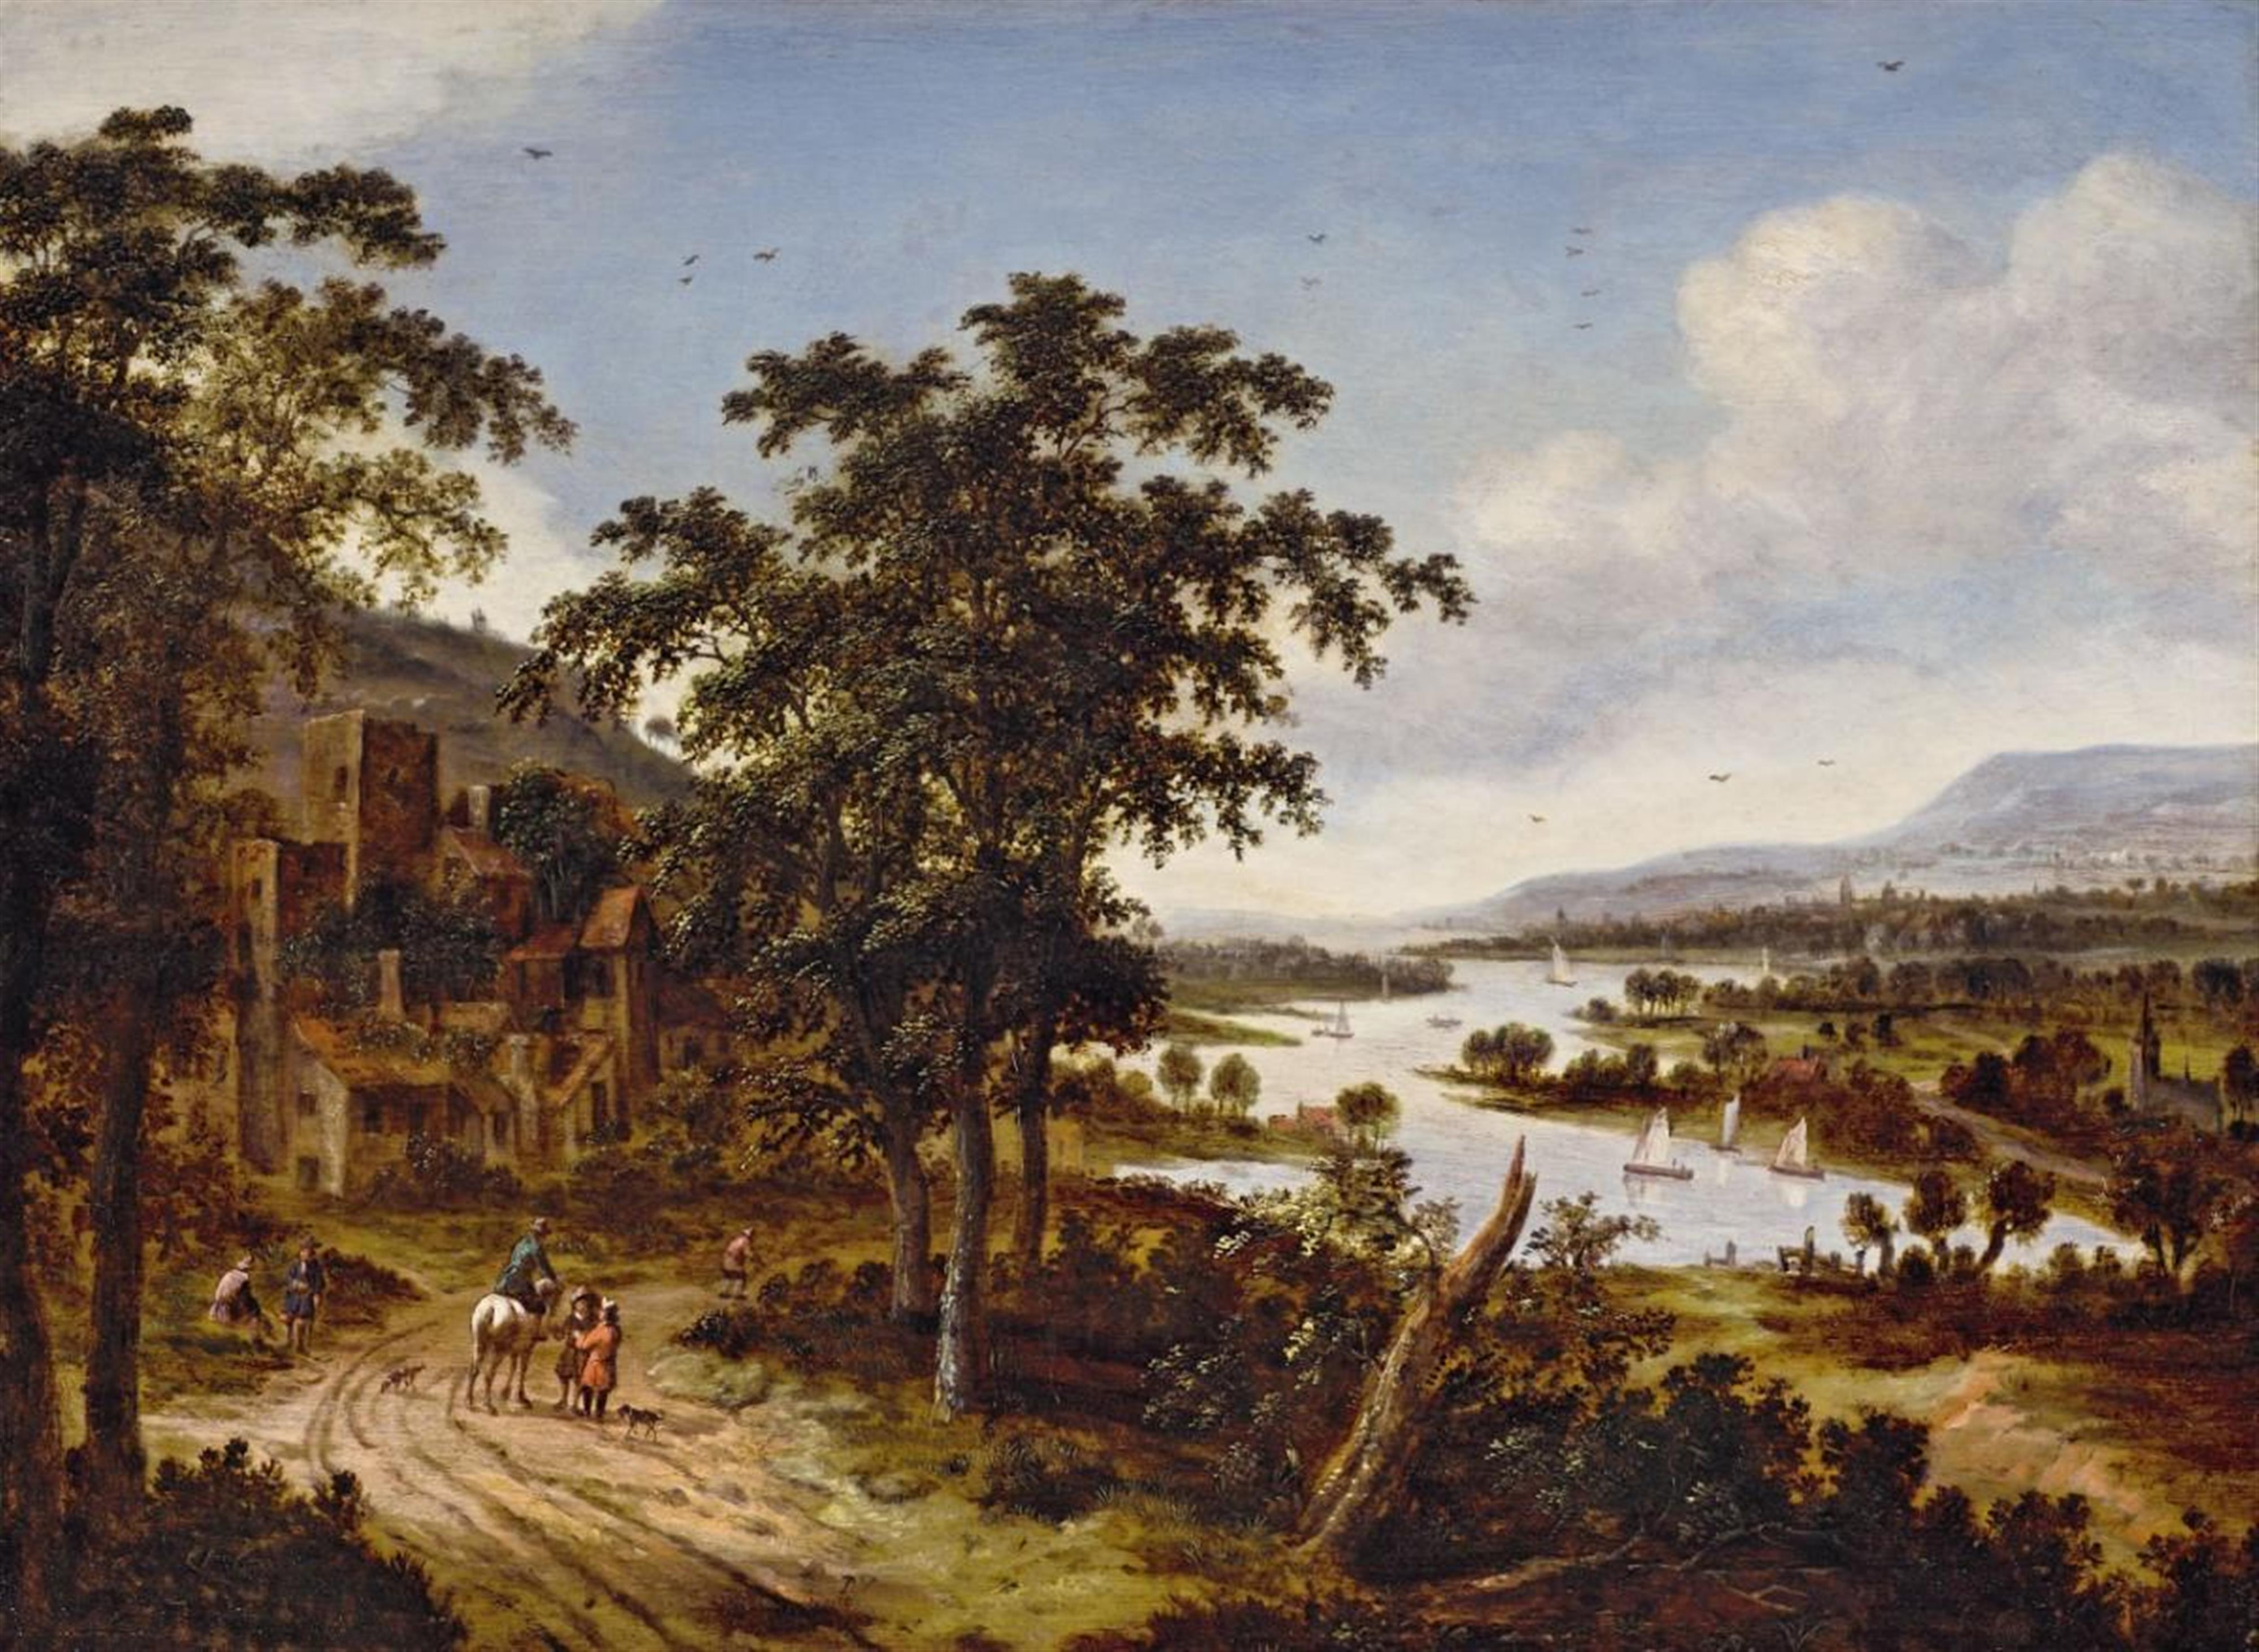 Dionys Verburg - RIVER LANDSCAPE WITH TRAVELLERS AND HORSEMAN - image-1